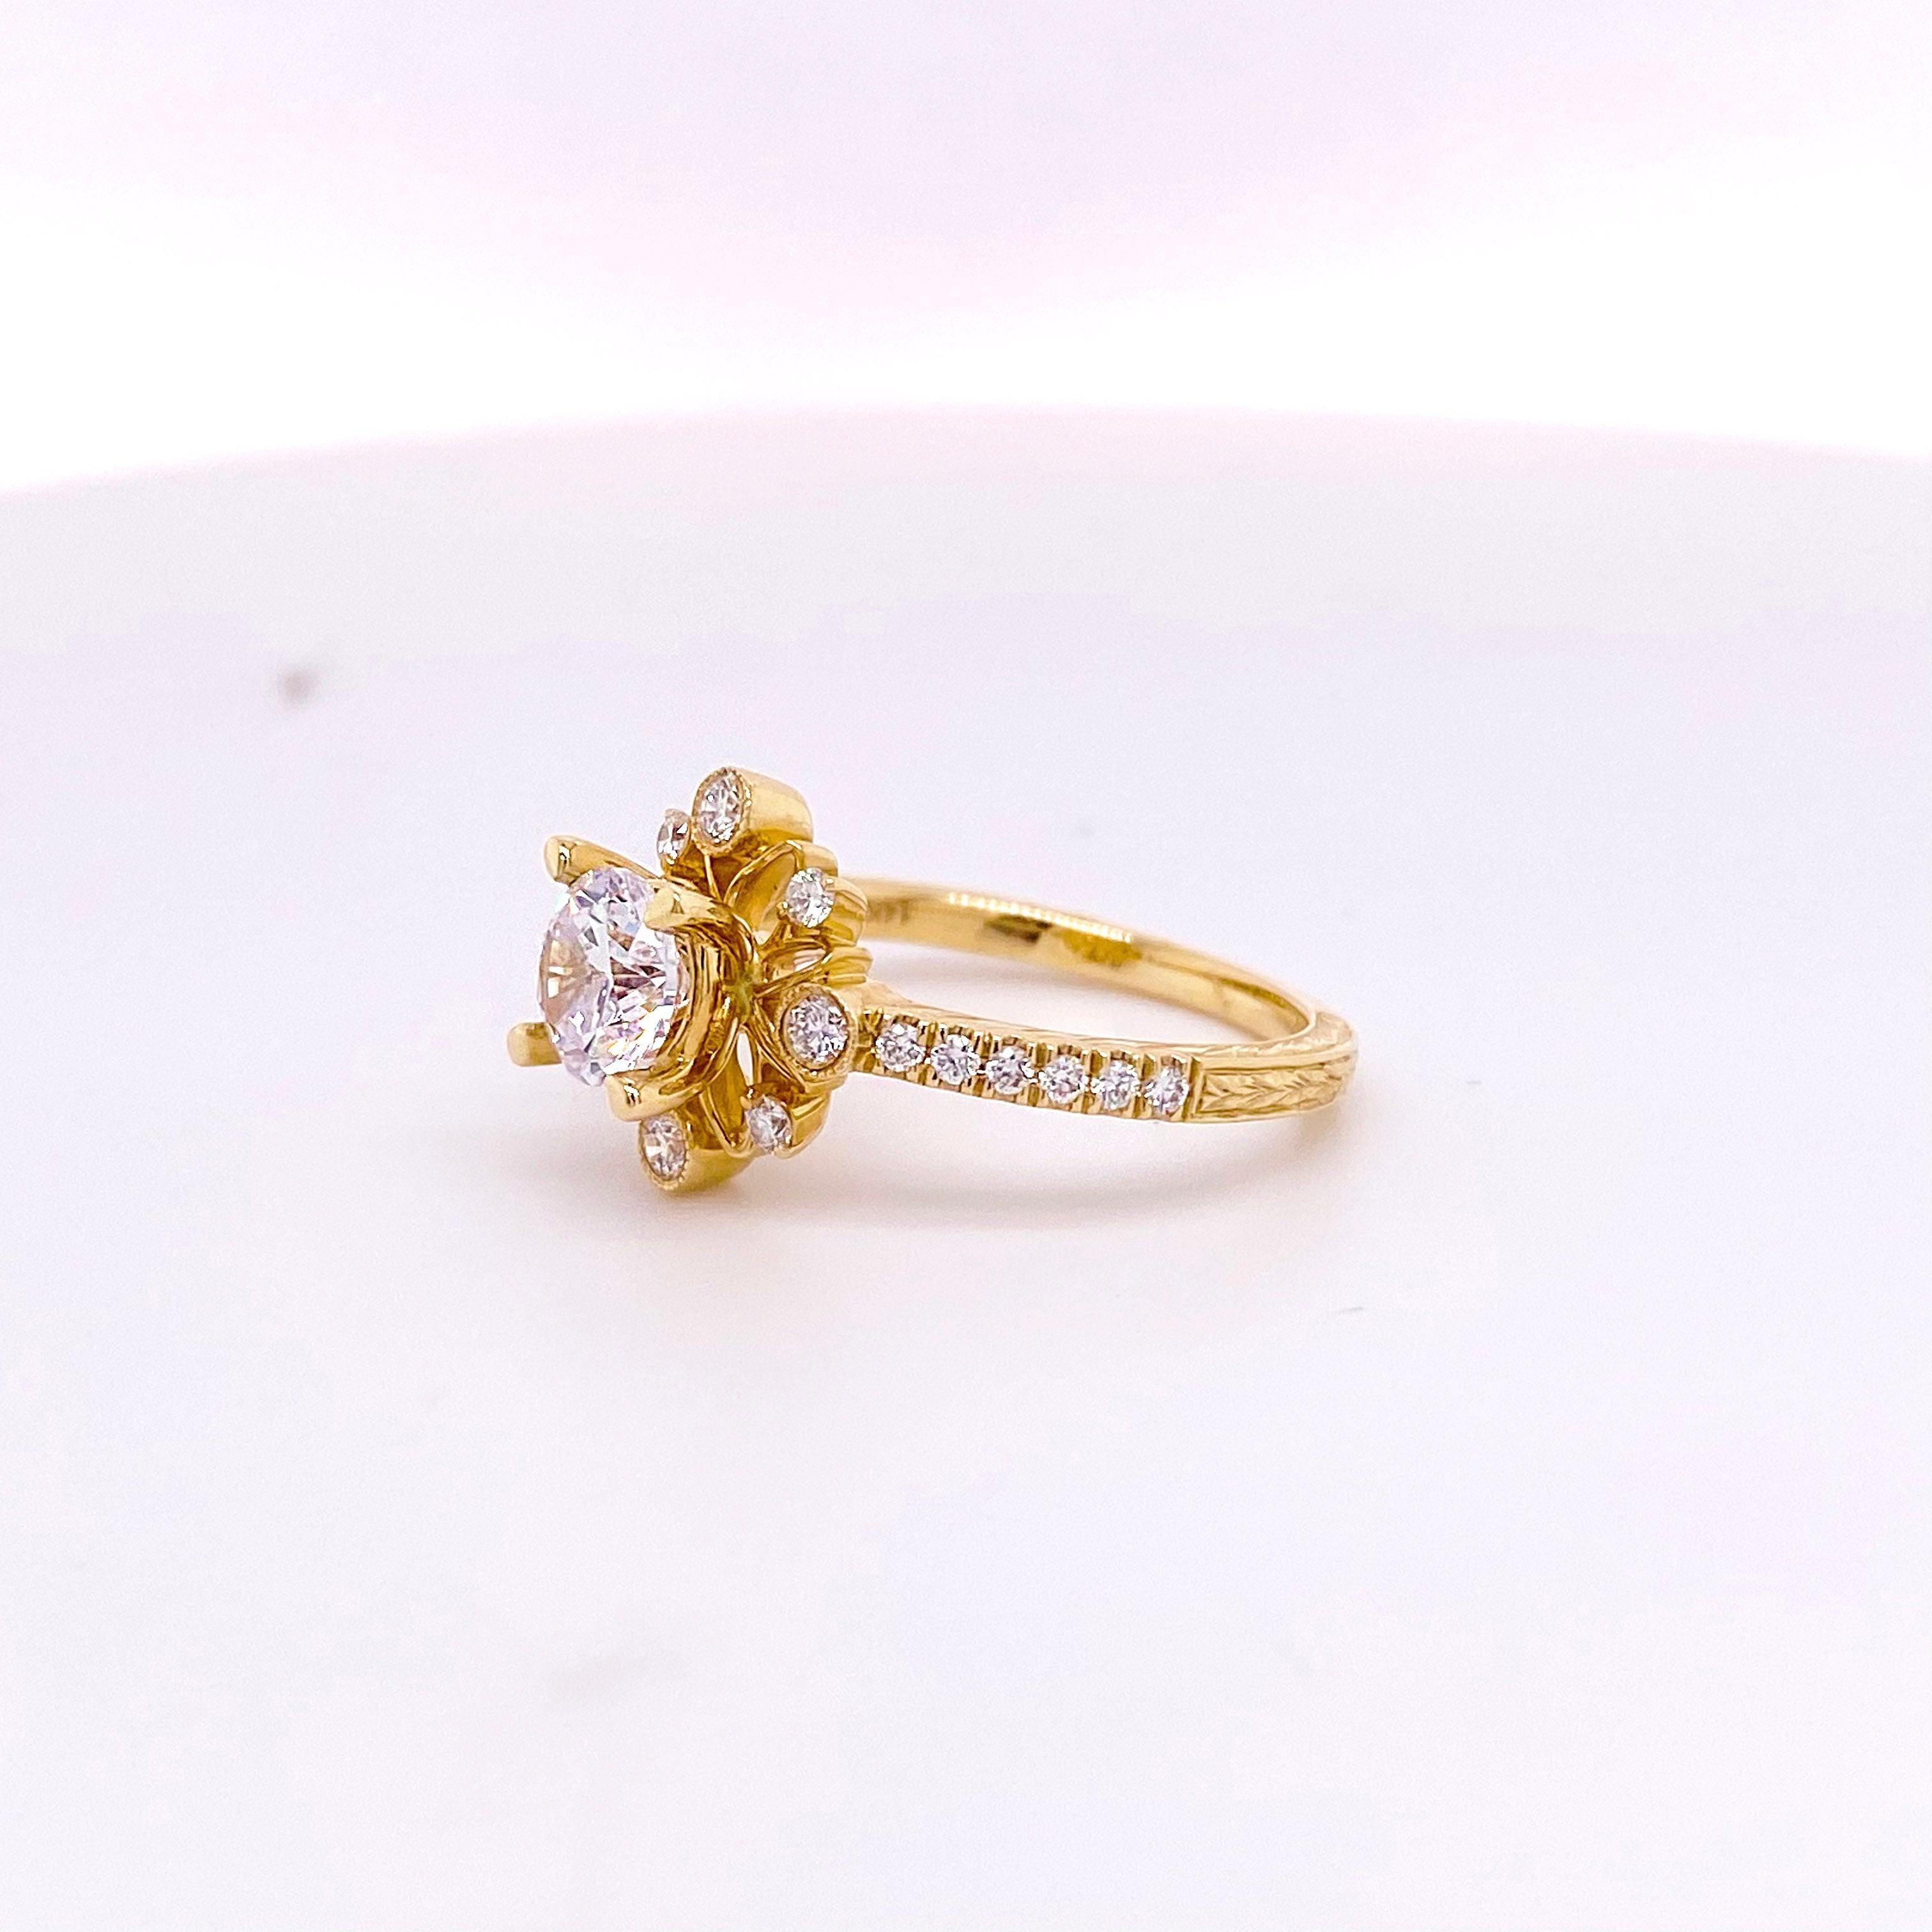 For Sale:  One Carat Diamond Engagement Ring, Fancy Halo, Yellow Gold, Round Brilliant 3